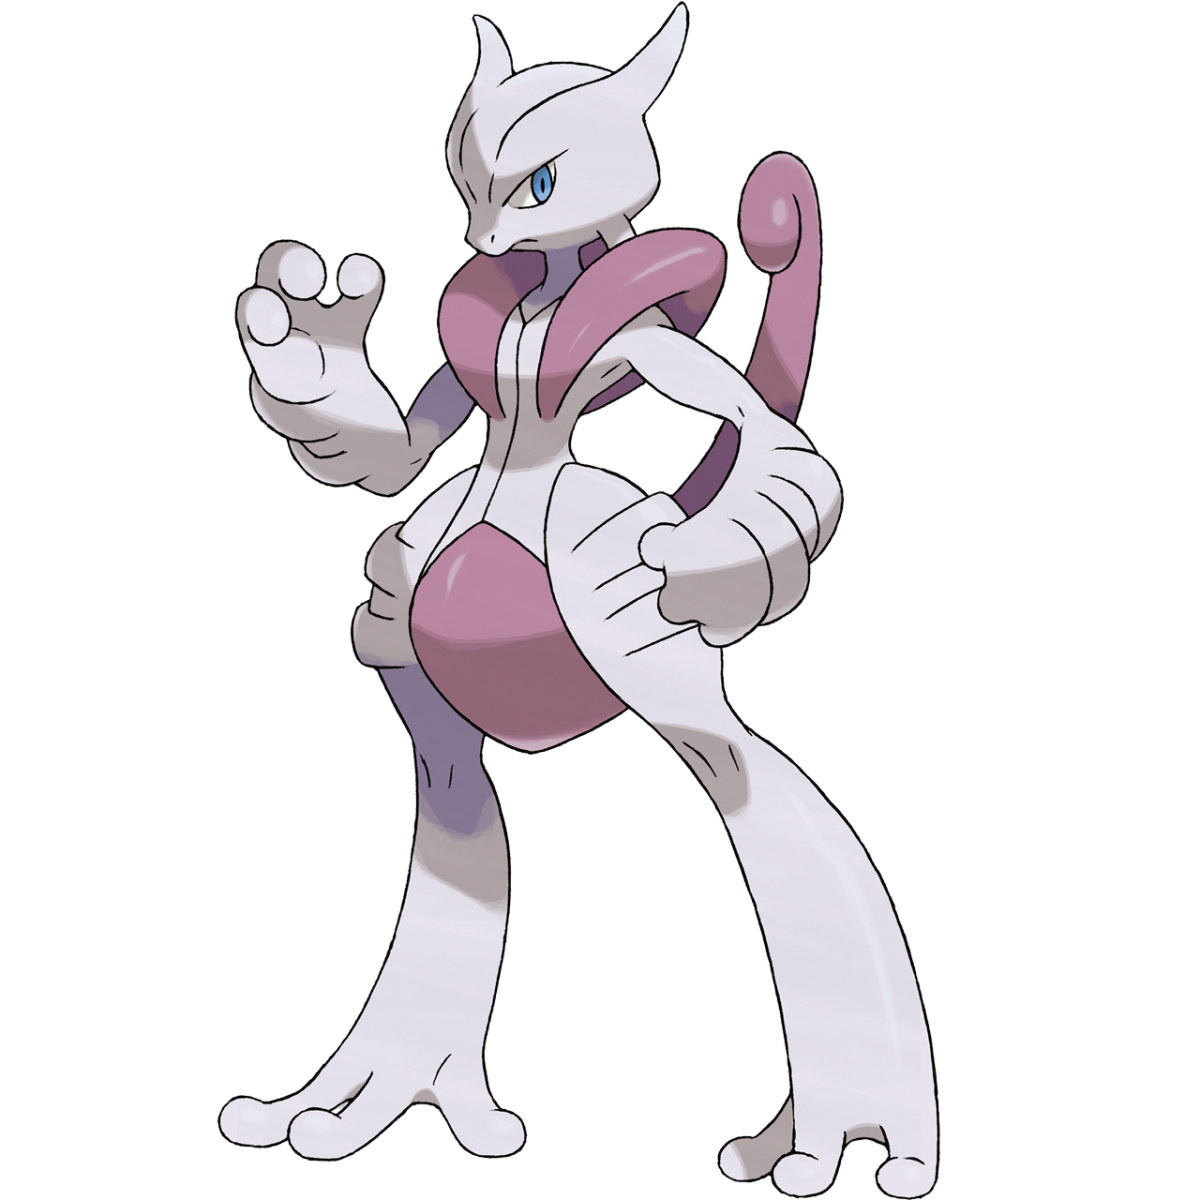 should i do another shadow mewtwo or wait for shadow kyogre